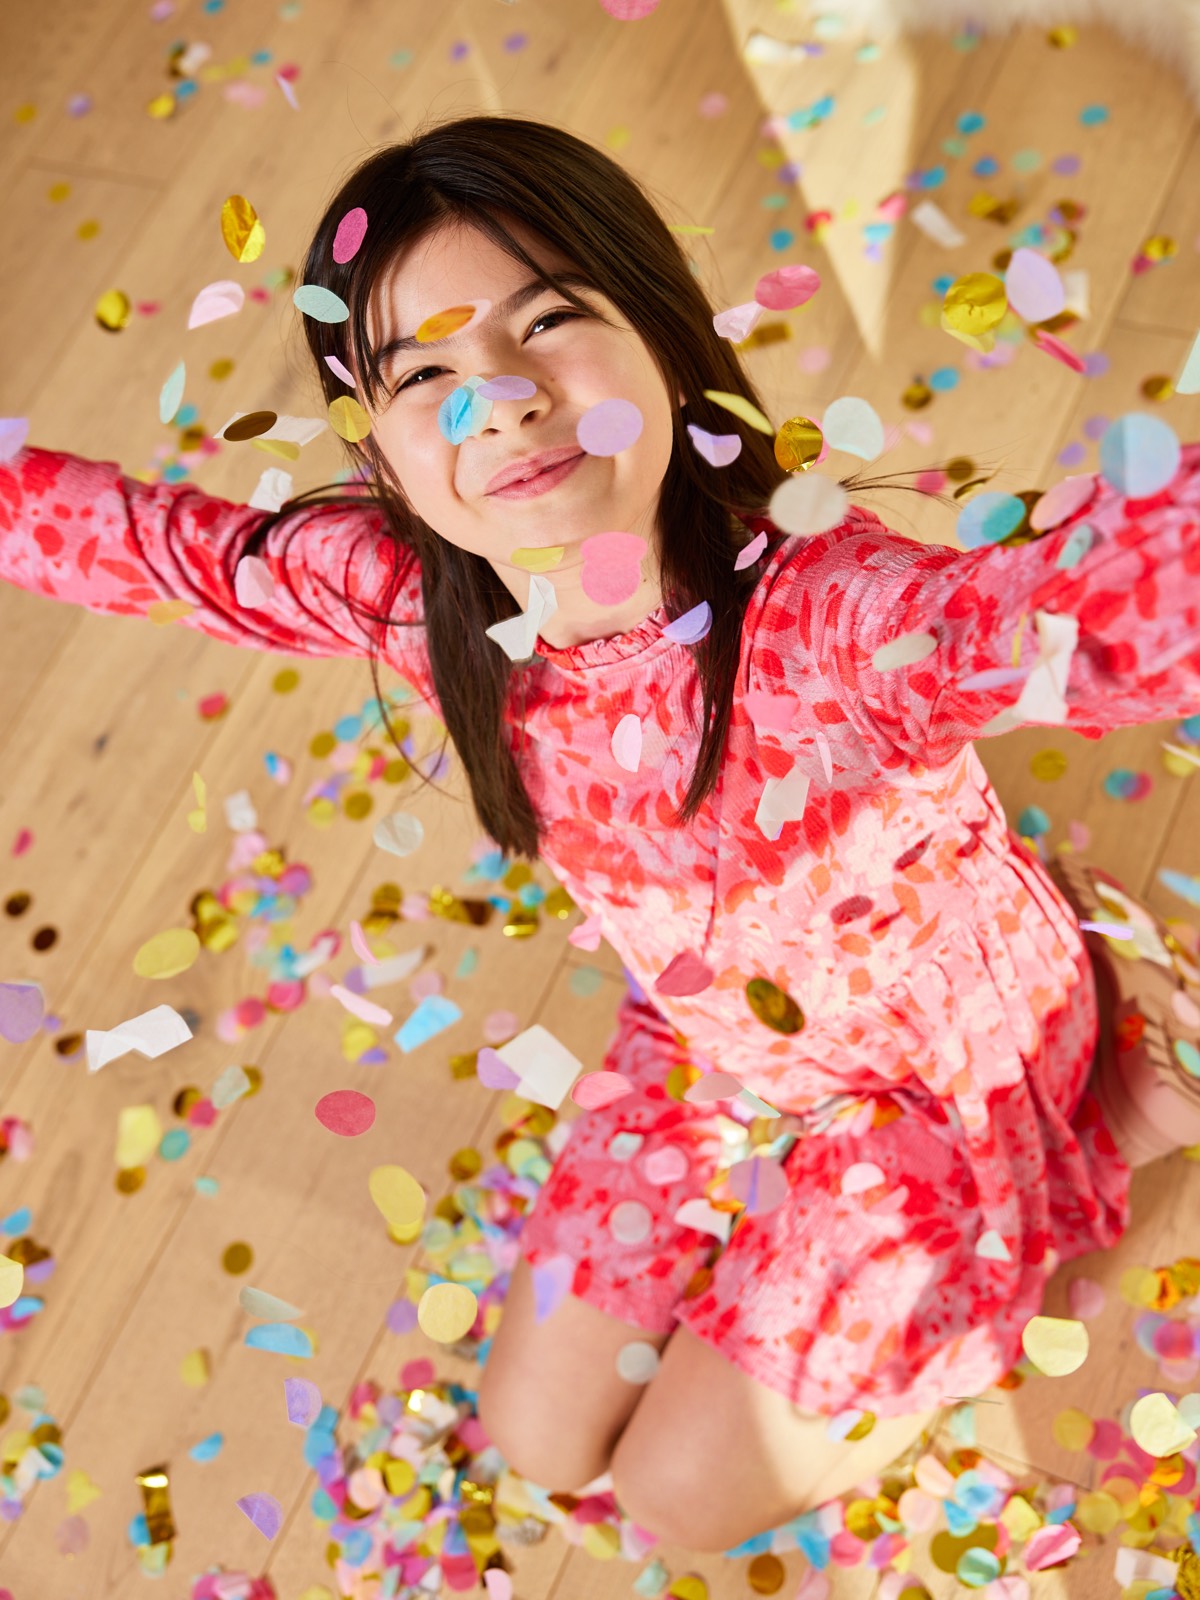 A child wearing the Izzy eco-friendly kids smock dress in pink, pictured with falling confetti and smiling at the camera.